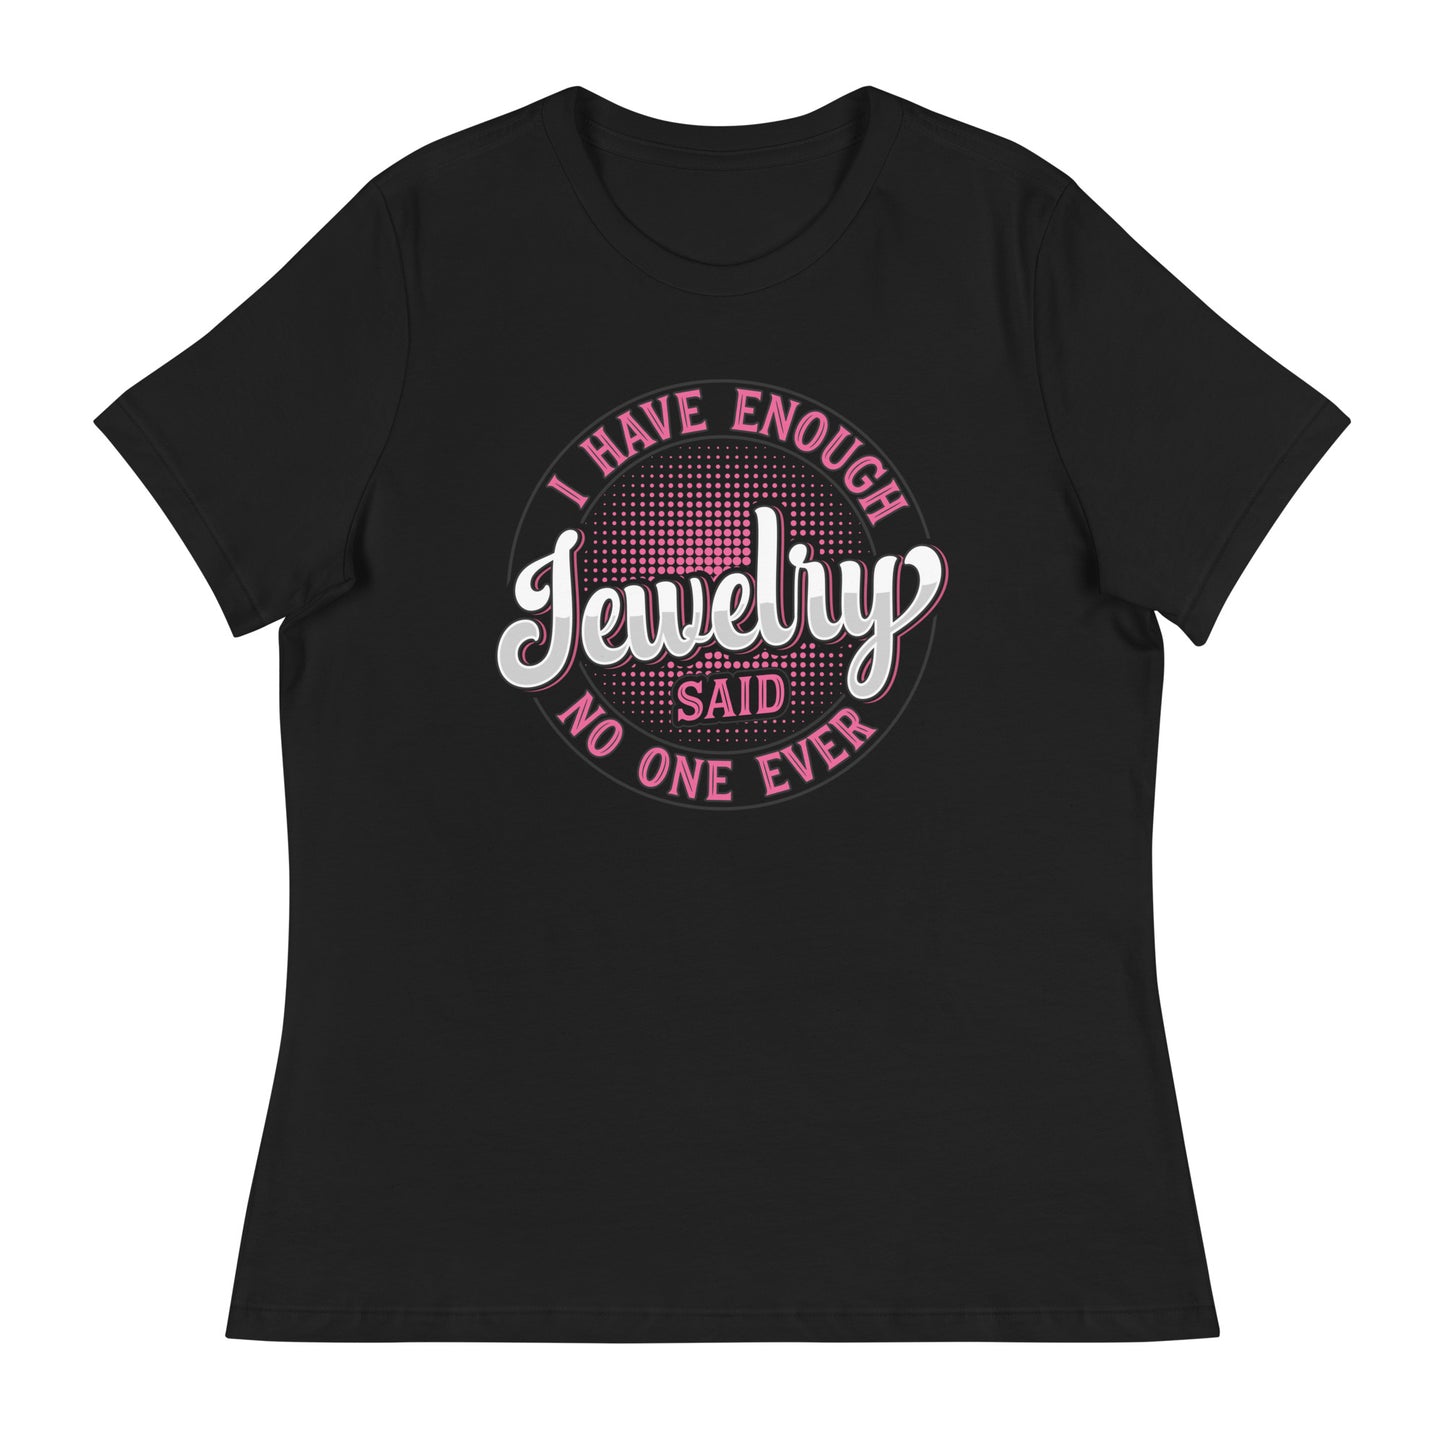 "I Have Enough Jewelry Said No One Ever" Quote Relaxed T-Shirt